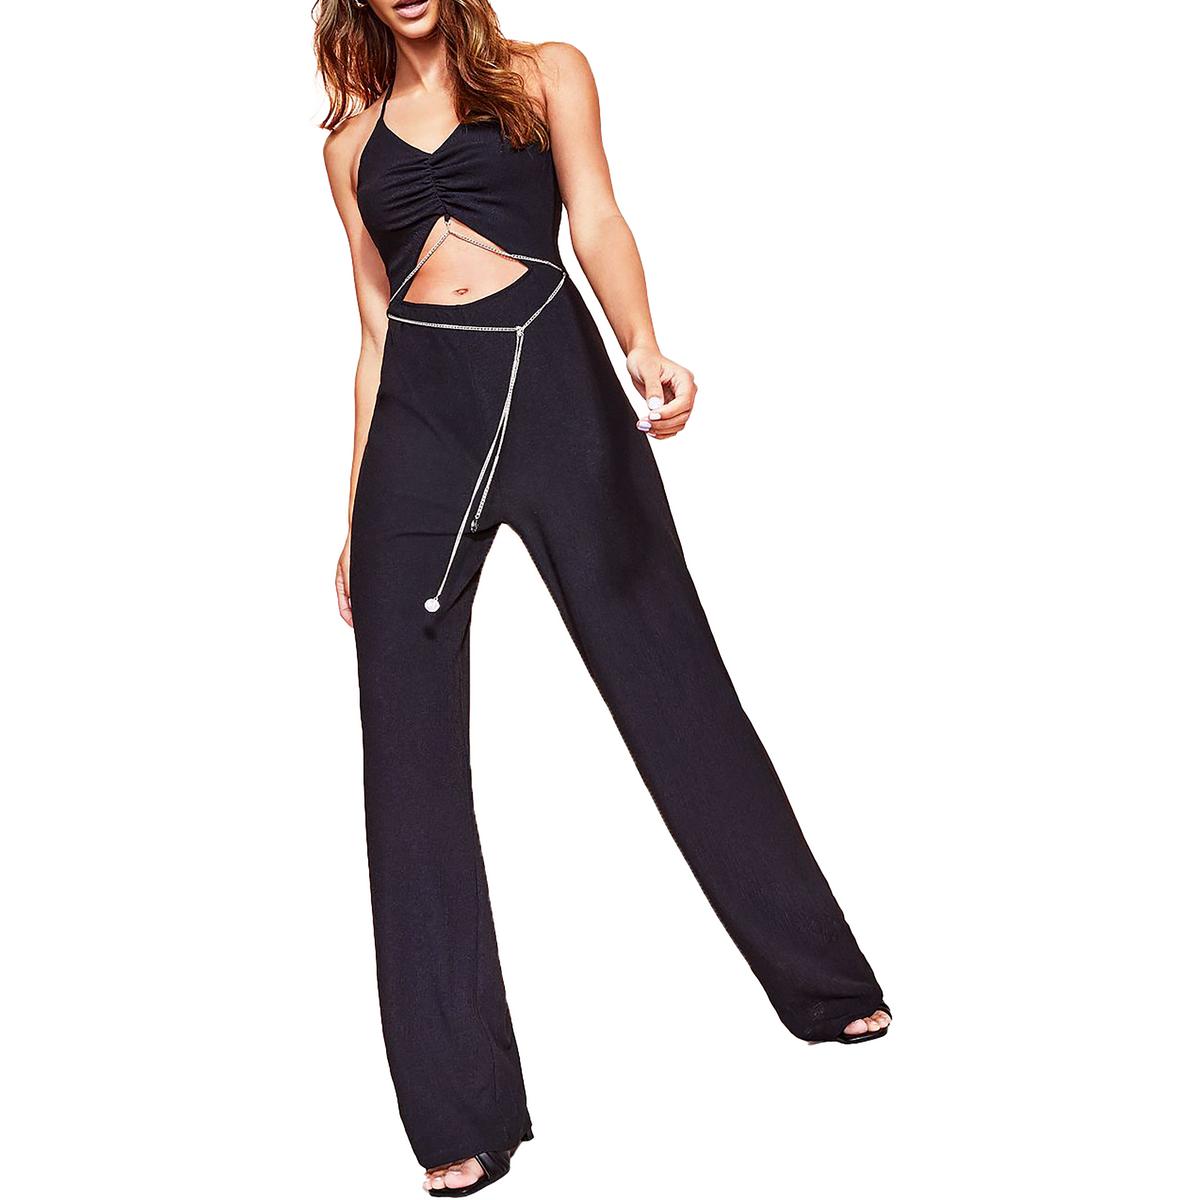 Royalty By Maluma Womens Cut-Out Halter Jumpsuit